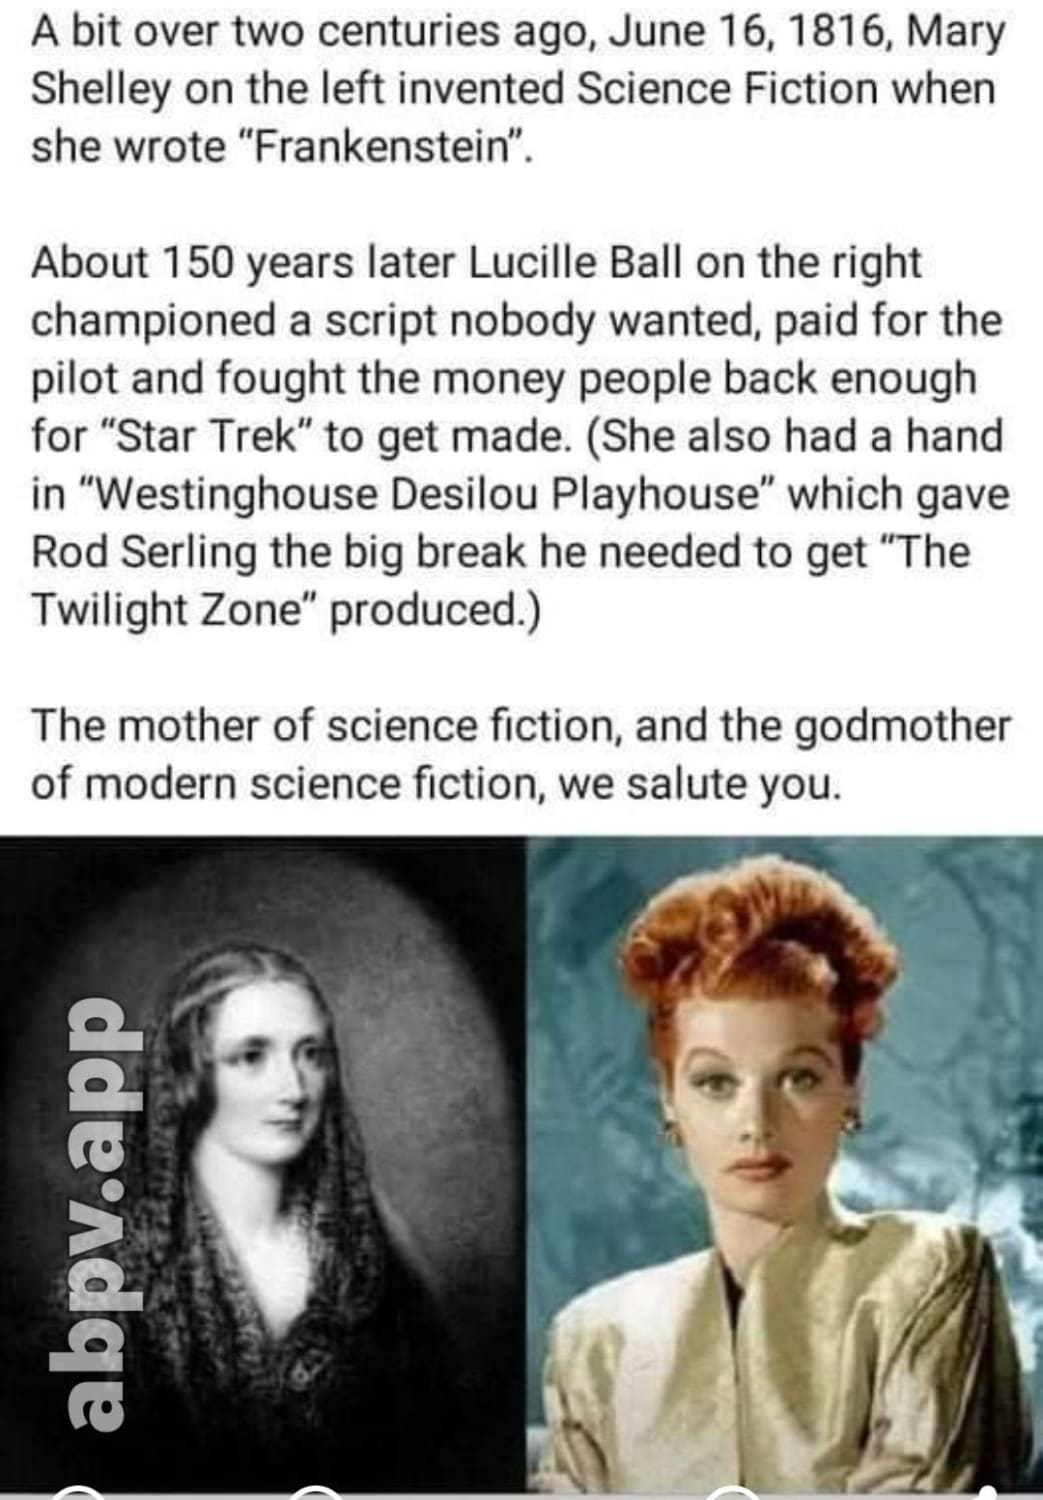 A bit over two centuries ago, June 16, 1816, Mary Shelley on the left invented Science Fiction when she wrote "Frankenstein". About 150 years later Lucille Ball on the right championed a script nobody wanted, paid for the pilot and fought the money people back enough for "Star Trek" to get made. (She also had a hand in "Westinghouse Desilou Playhouse" which gave Rod Serling the big break he needed to get "The Twilight Zone" produced.) The mother of science fiction, and the godmother of modern science fiction, we salute you. - America’s best pics and videos